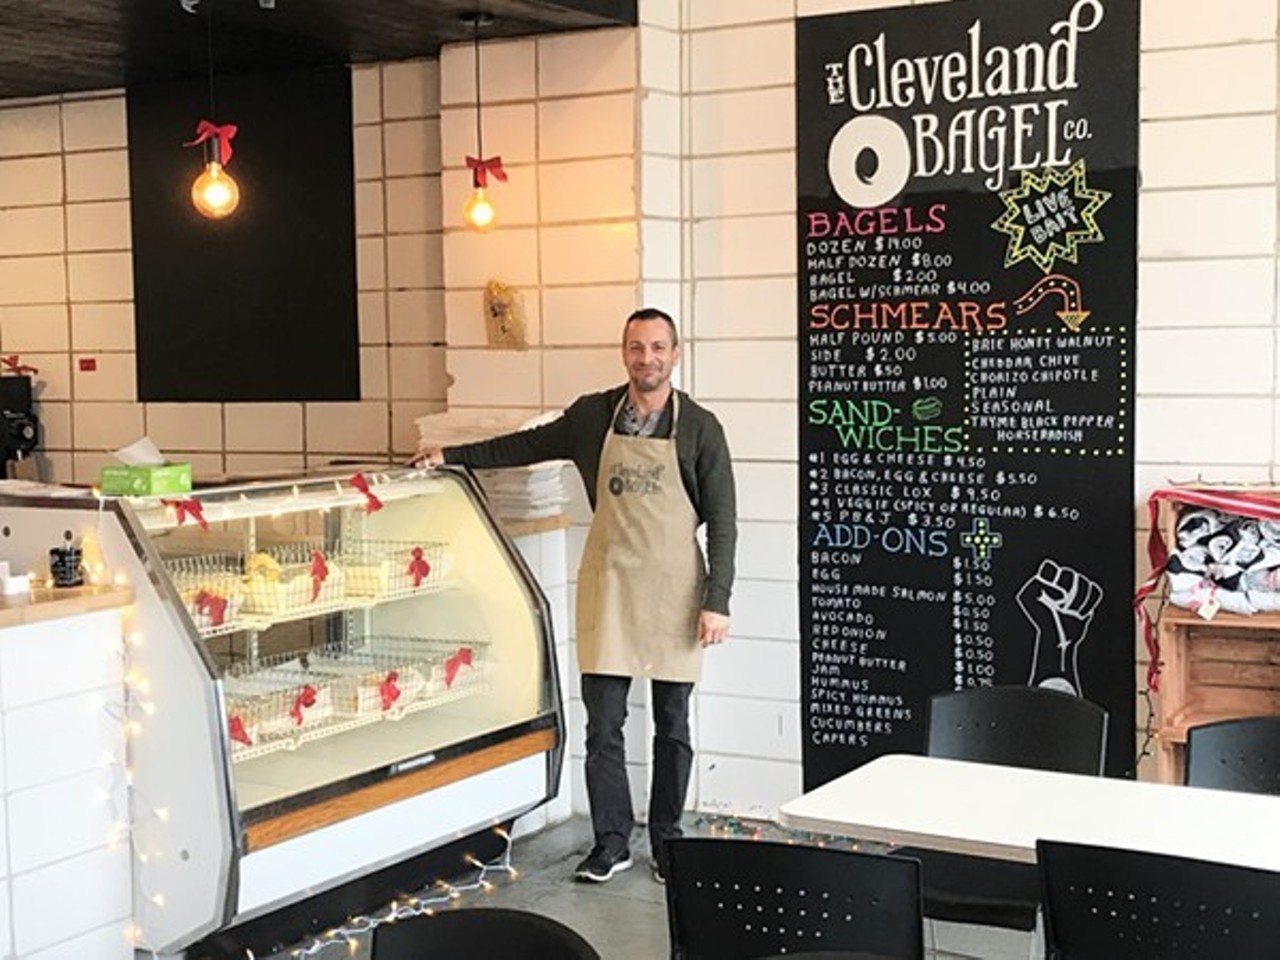 Cleveland Bagel Co's Everything Mix The best thing after a bag of Cleveland Bagel's hot, malty, and fresh mish-mosh bagels is a jar of their Everything Mix.  It's also less perishable and easier to gift.